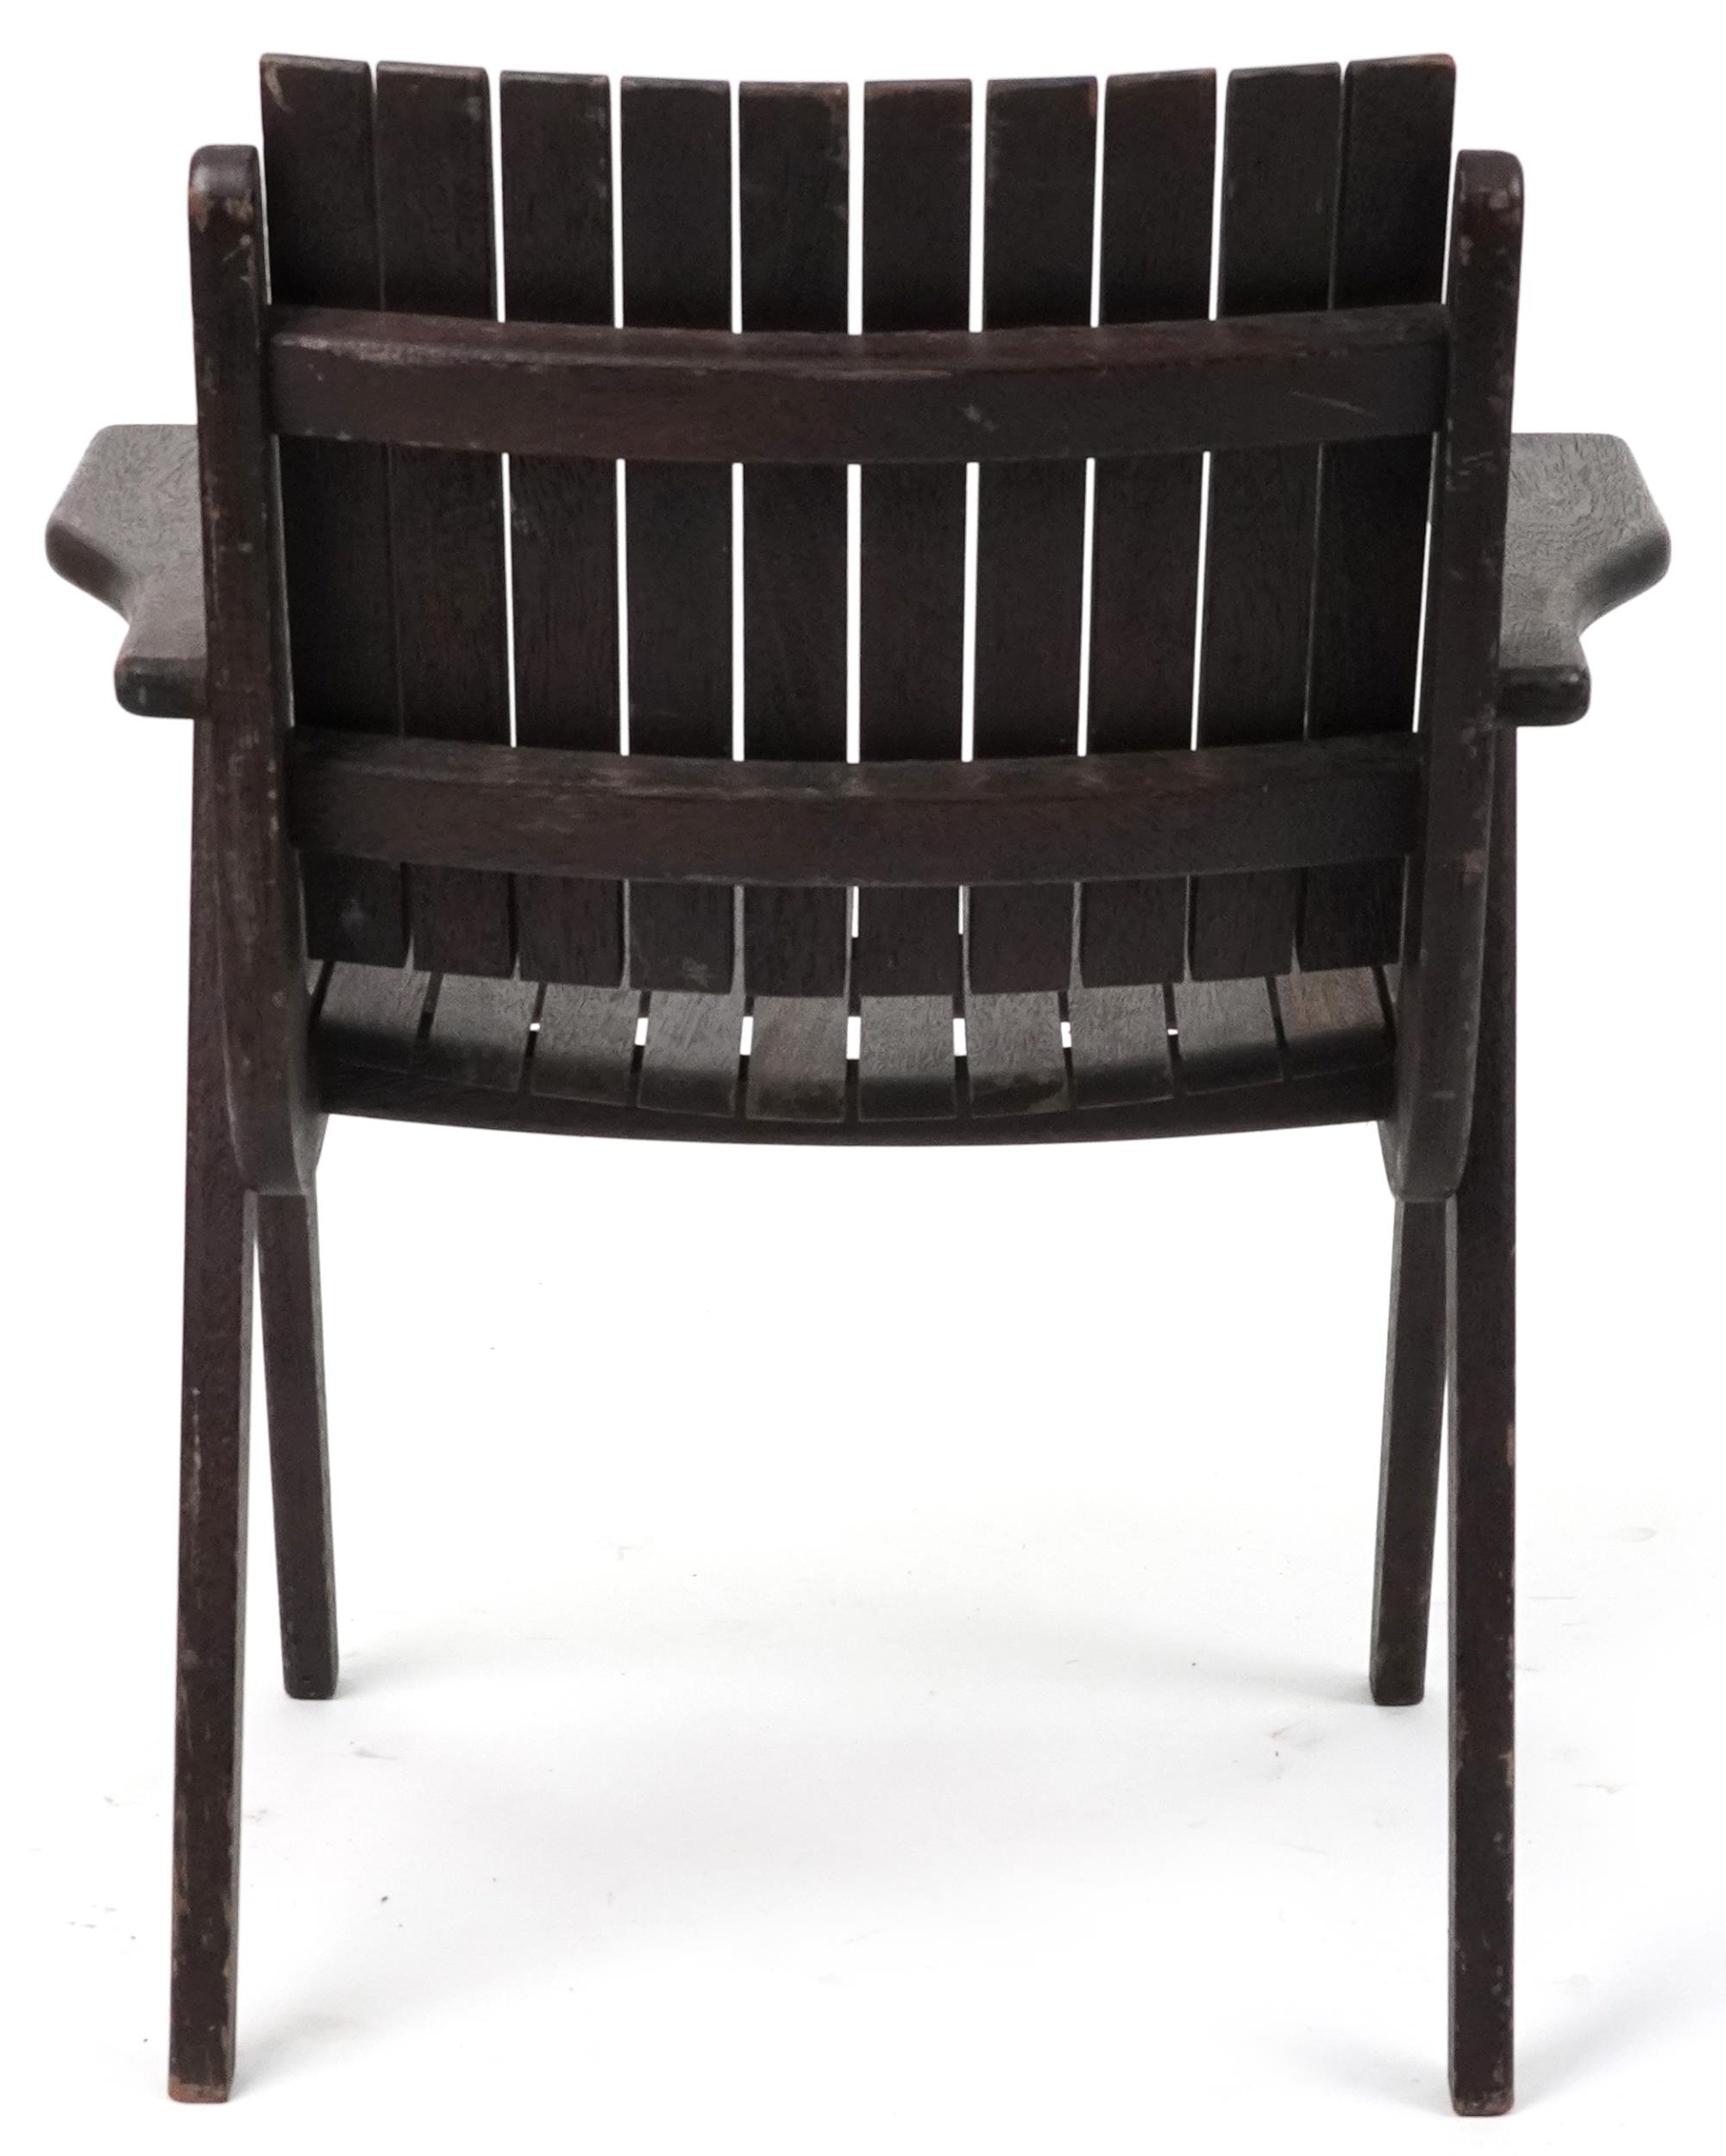 Autoban, stained teak slice chair, 81cm high - Image 4 of 4